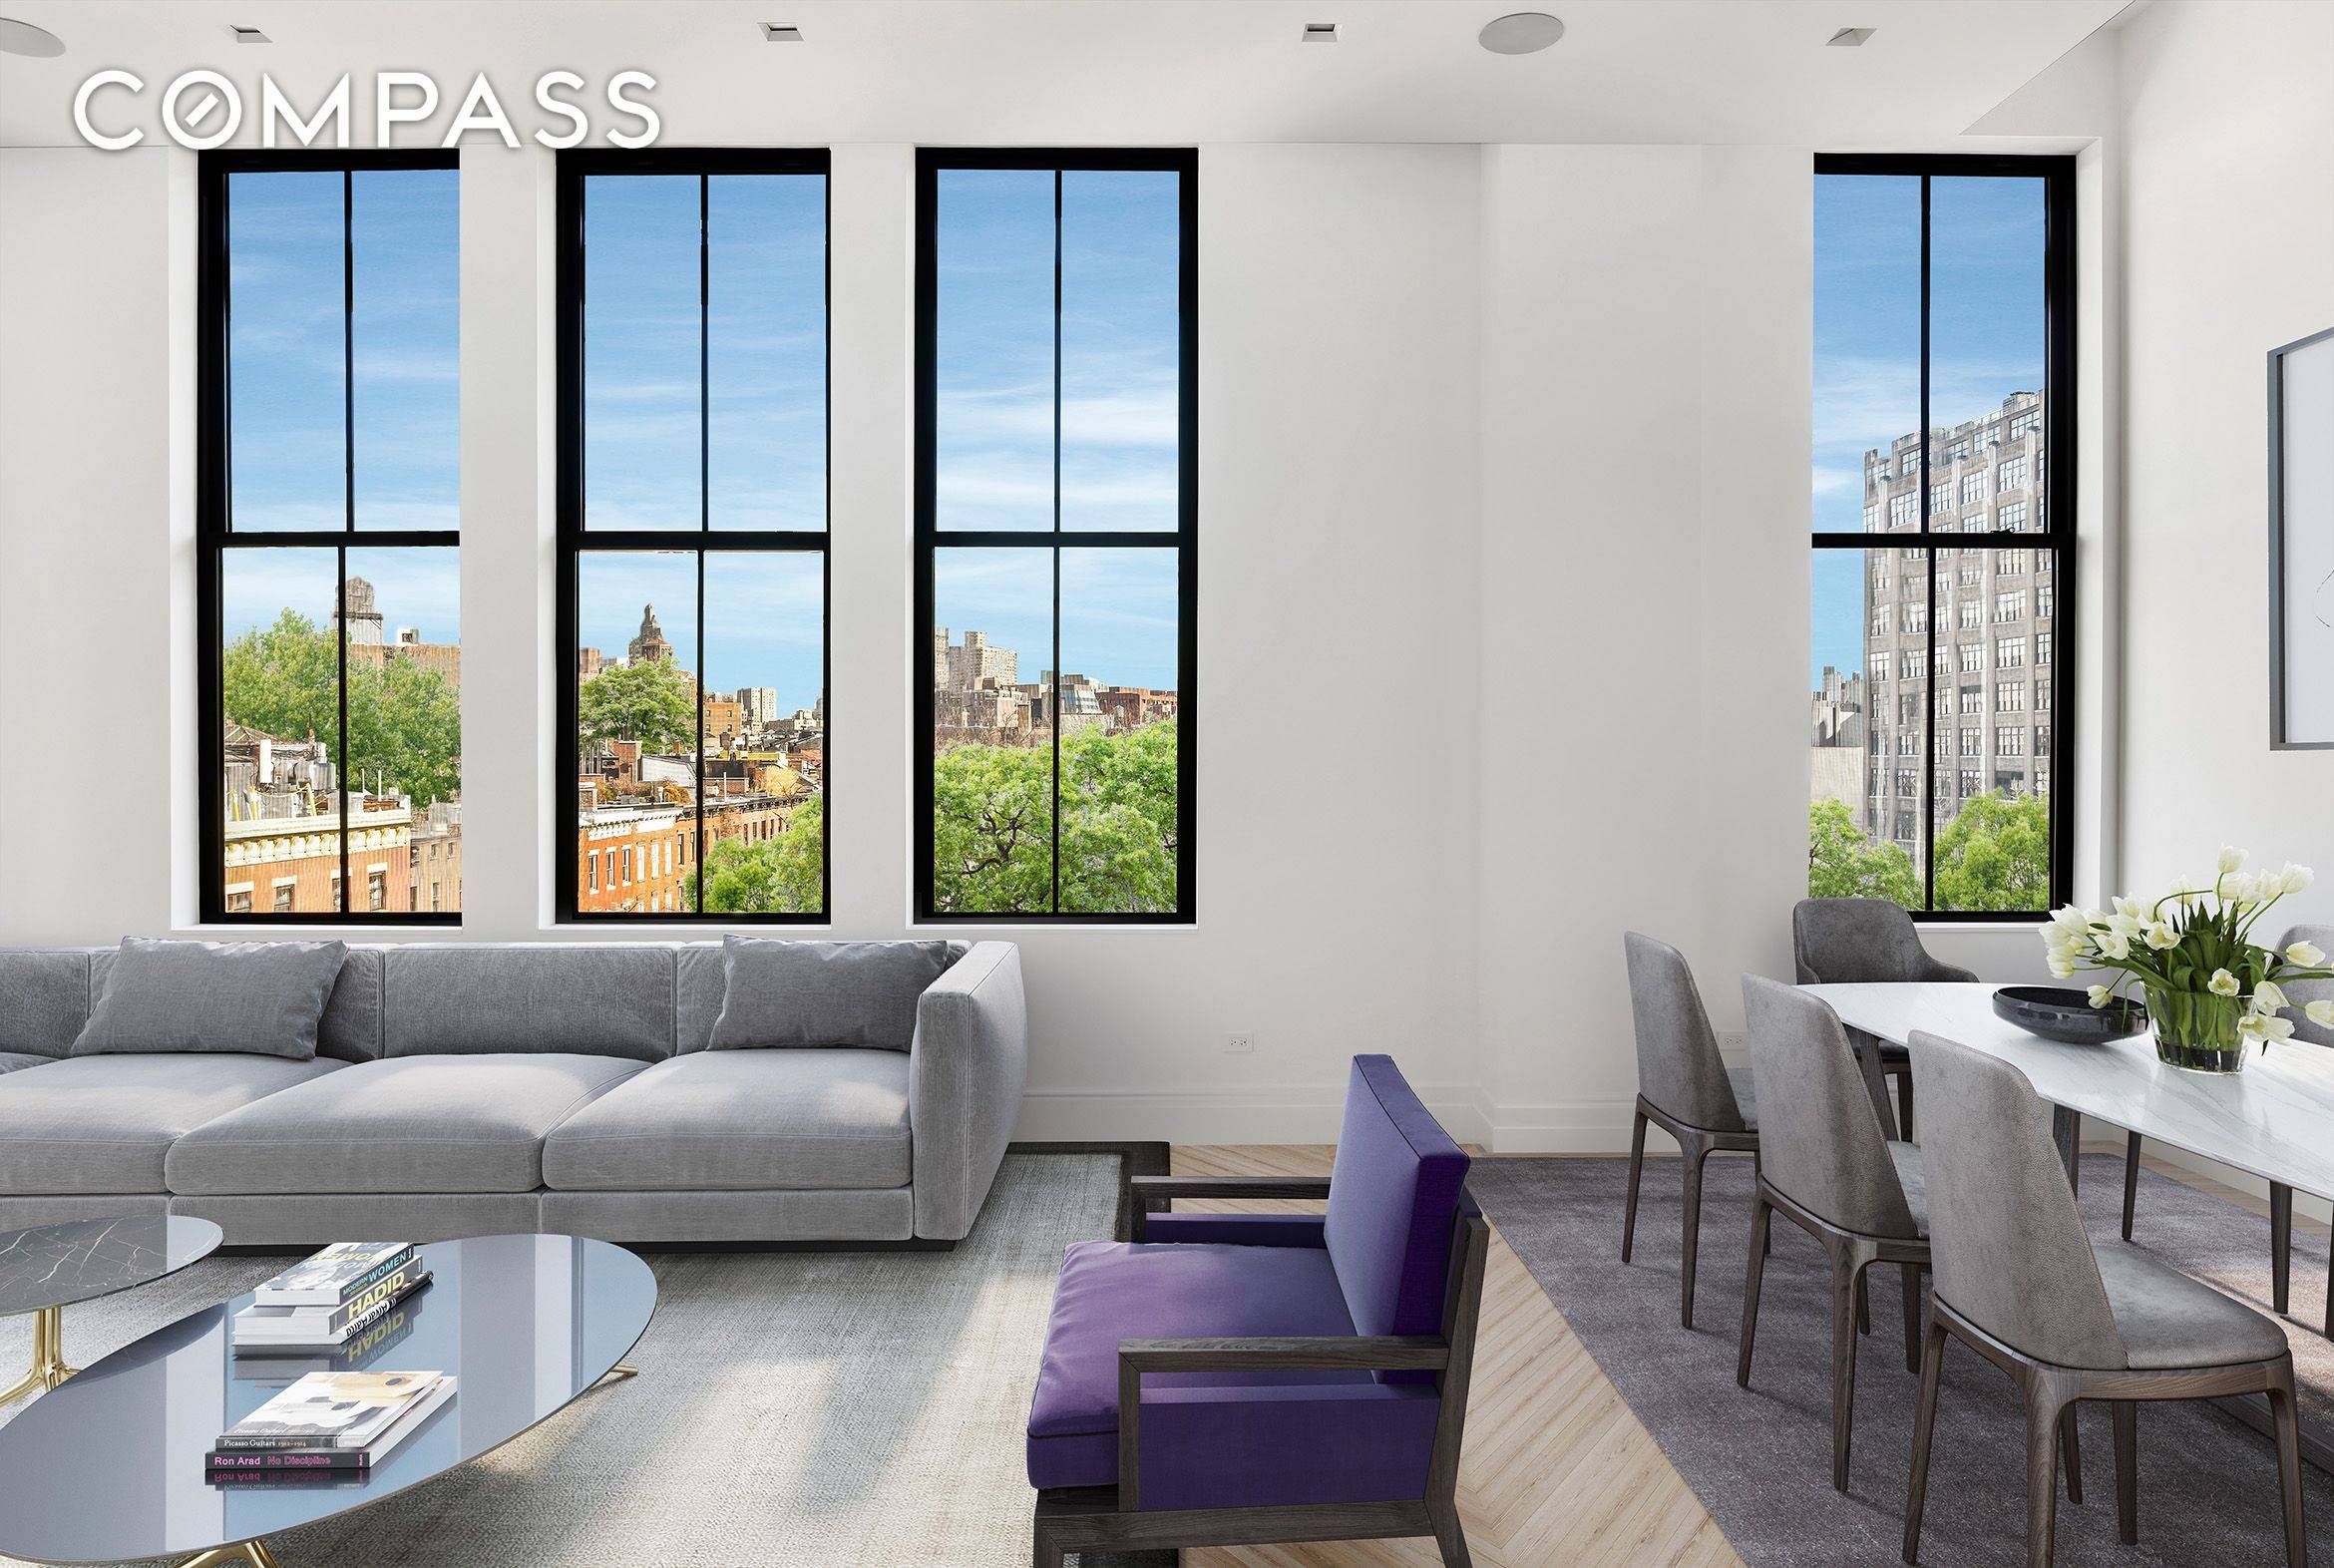 A corner three bedroom, three and a half bathroom duplex residence with expansive views over the West Village and beyond.